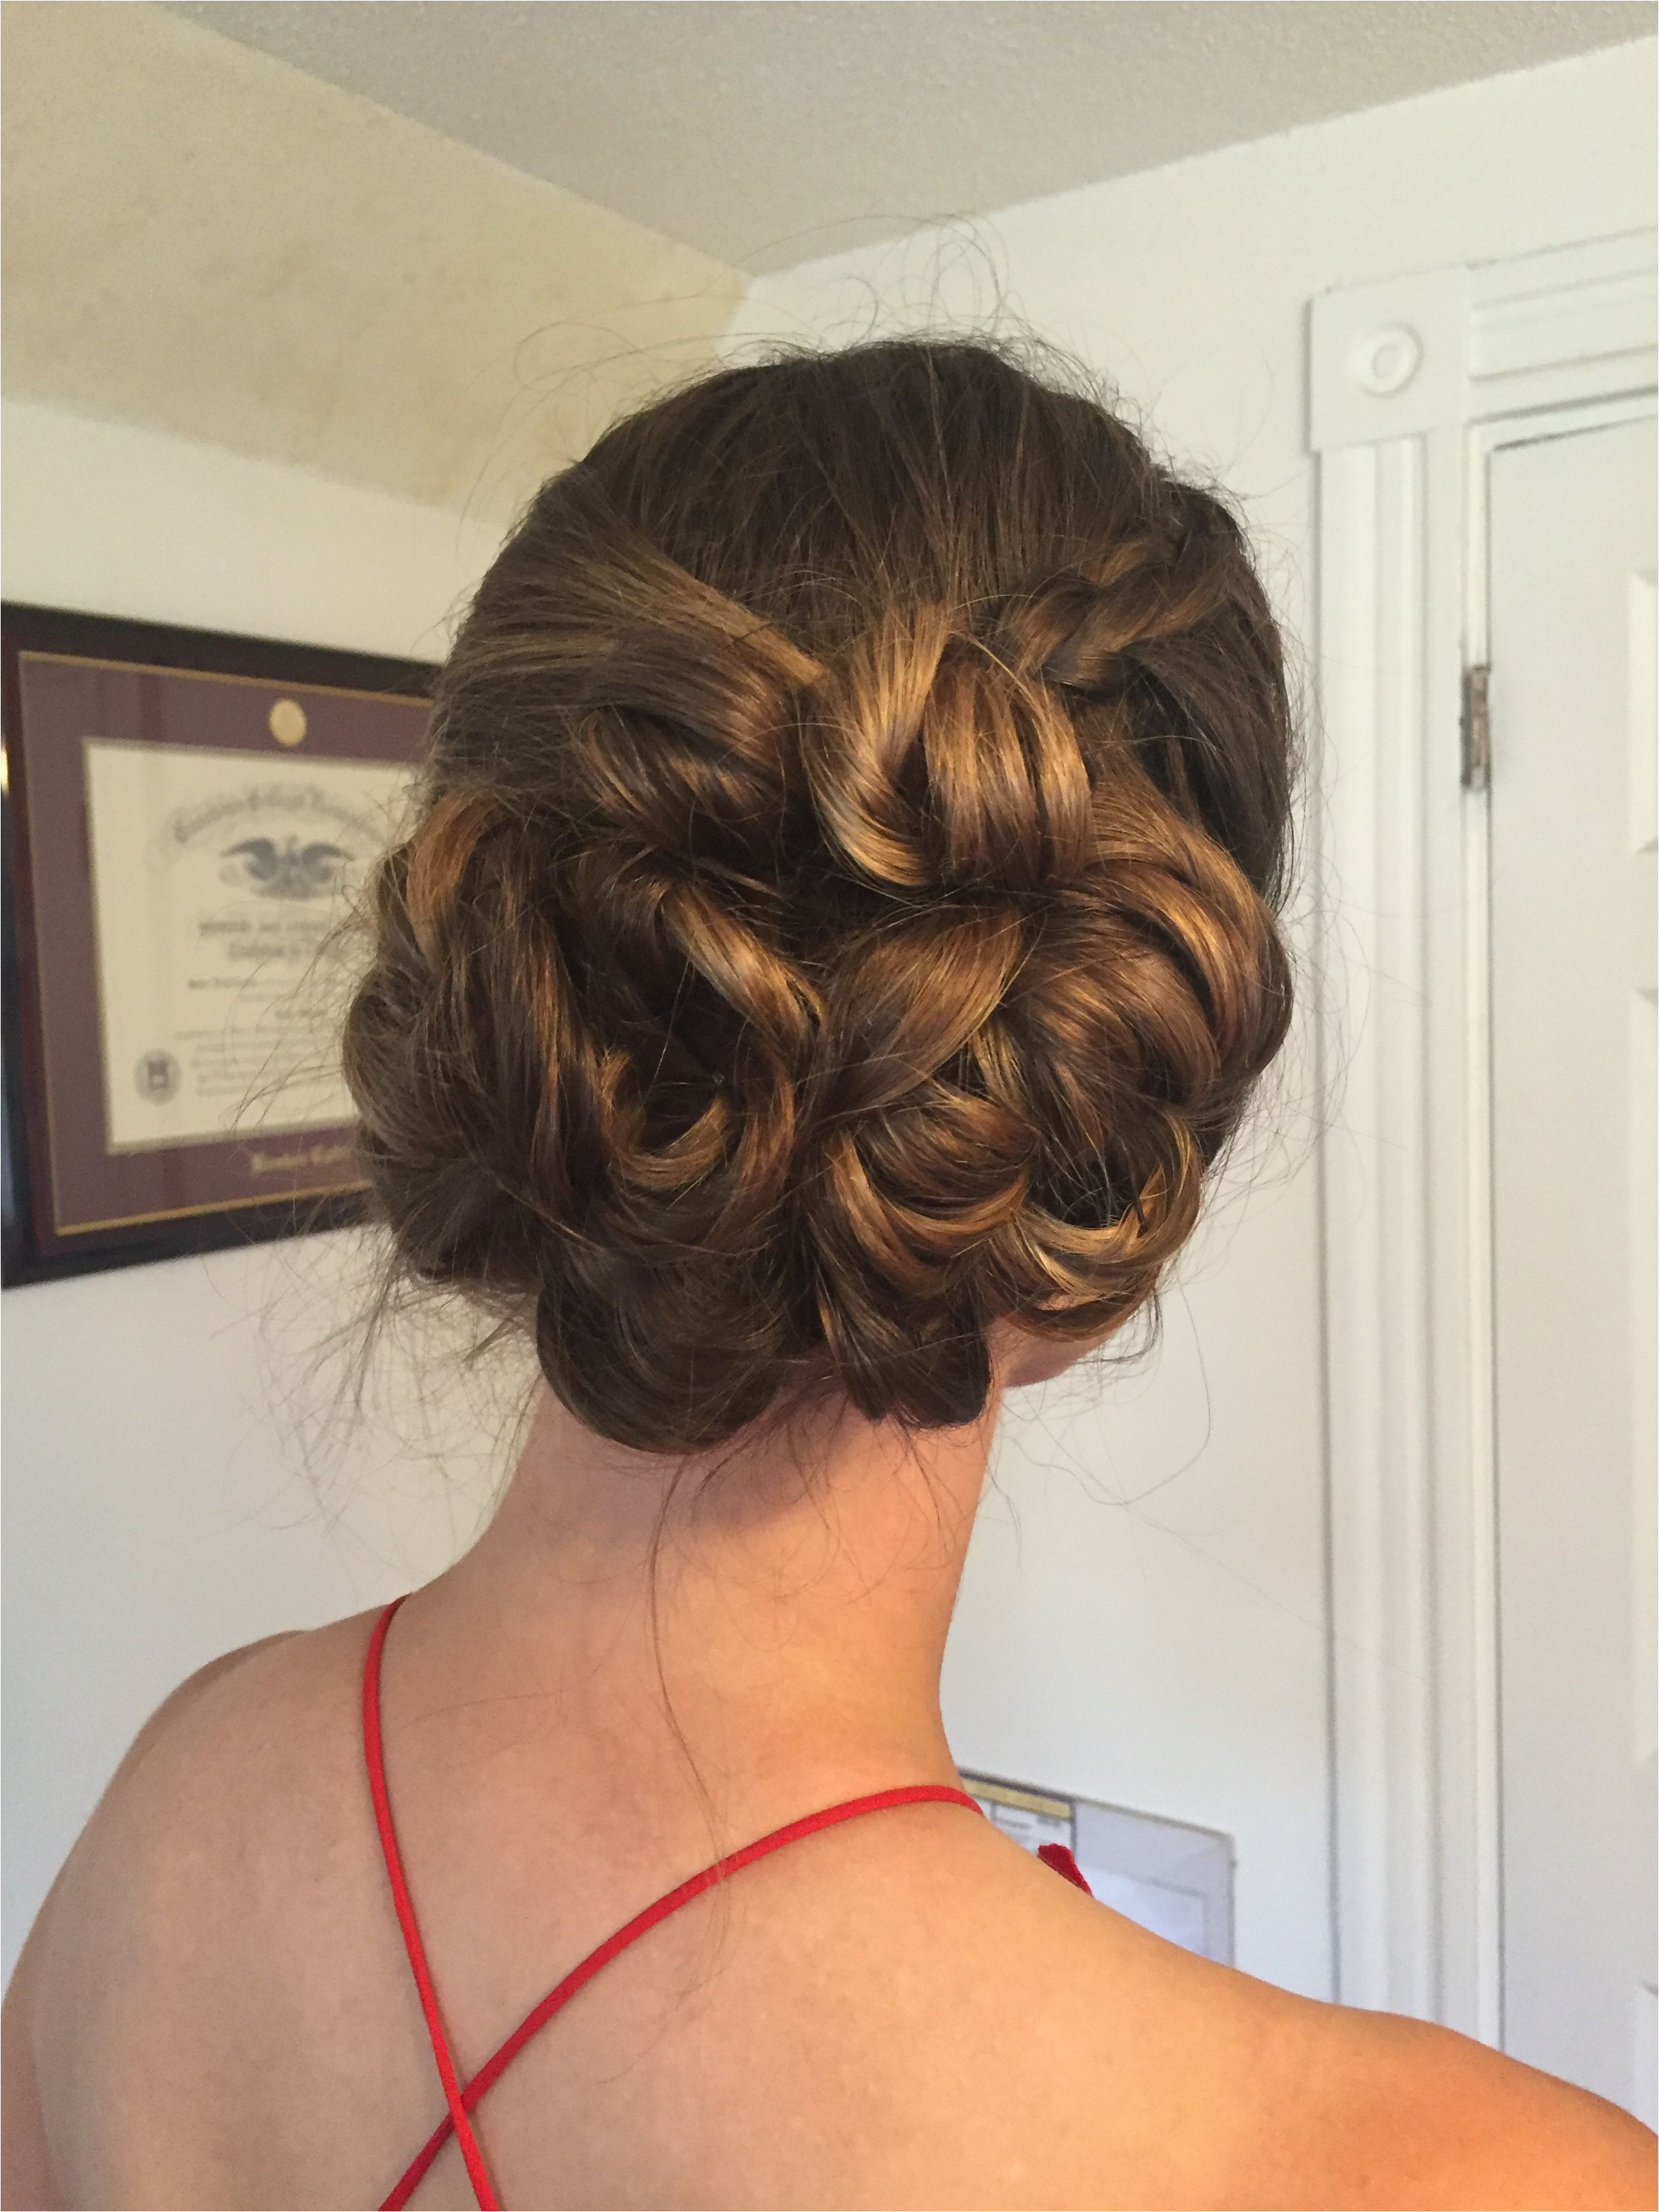 Low side bun updo for wedding guest or bridesmaid hair with side braid and pinned curls